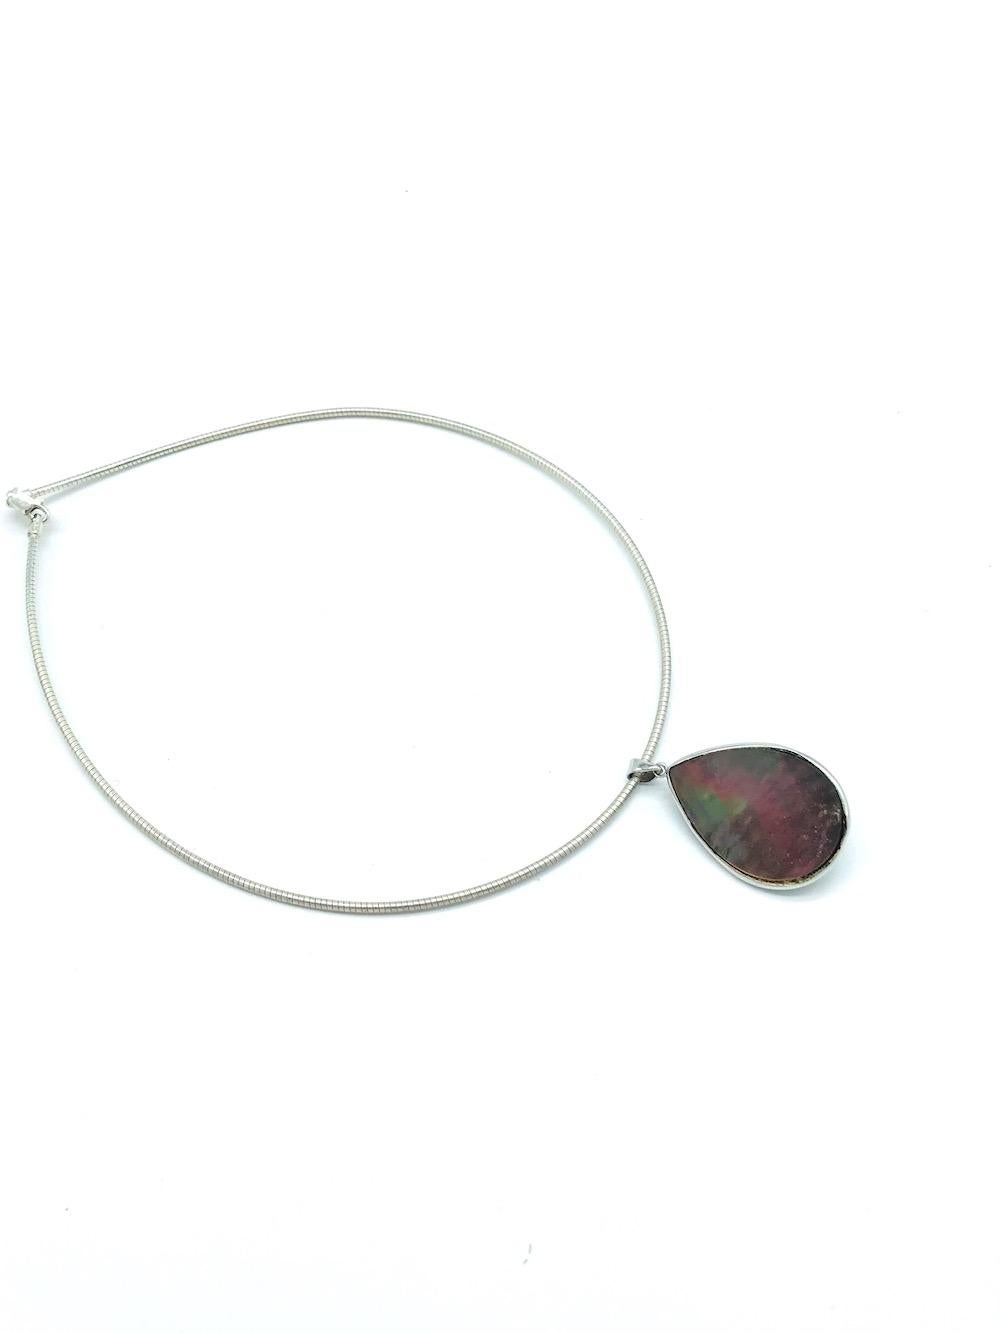 Mother of Pearl, Mobee Pearl Necklace Wire, Pendant 
Gray Luminous, Pearl set in a near 1-3/4 x 1-inch, pear shaped drop set in bezel. 
Neck wire is a 1.90 mm rounded wire, 18 inches in length 
12.3 gram of weight 
Back side of pearl is a colorful